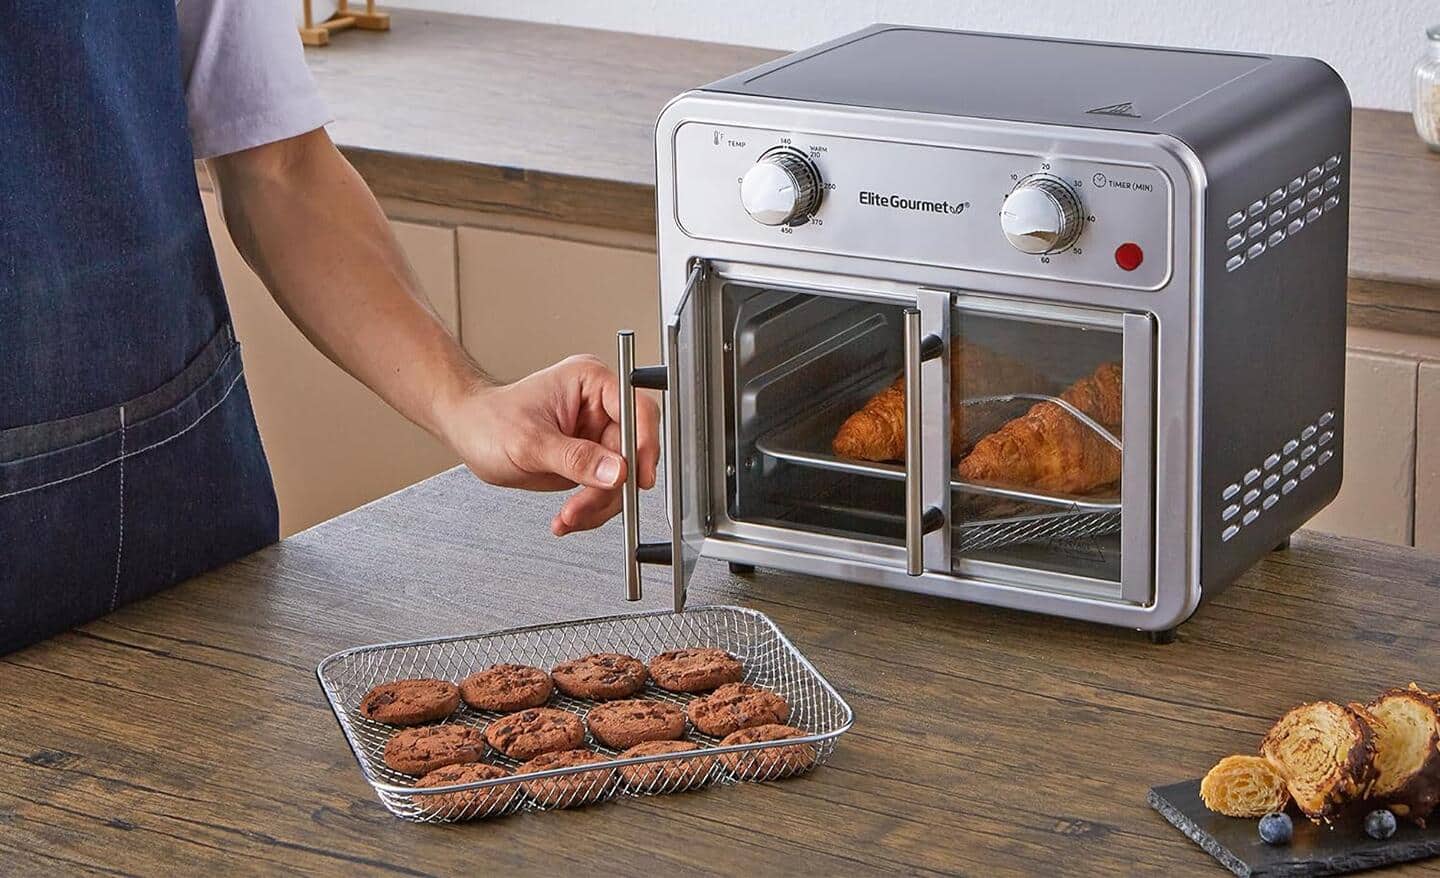 A stainless steel air fryer with double French doors sits on a counter. It has croissants inside and tray of cookies next to it. A person is holding one of its door handles.